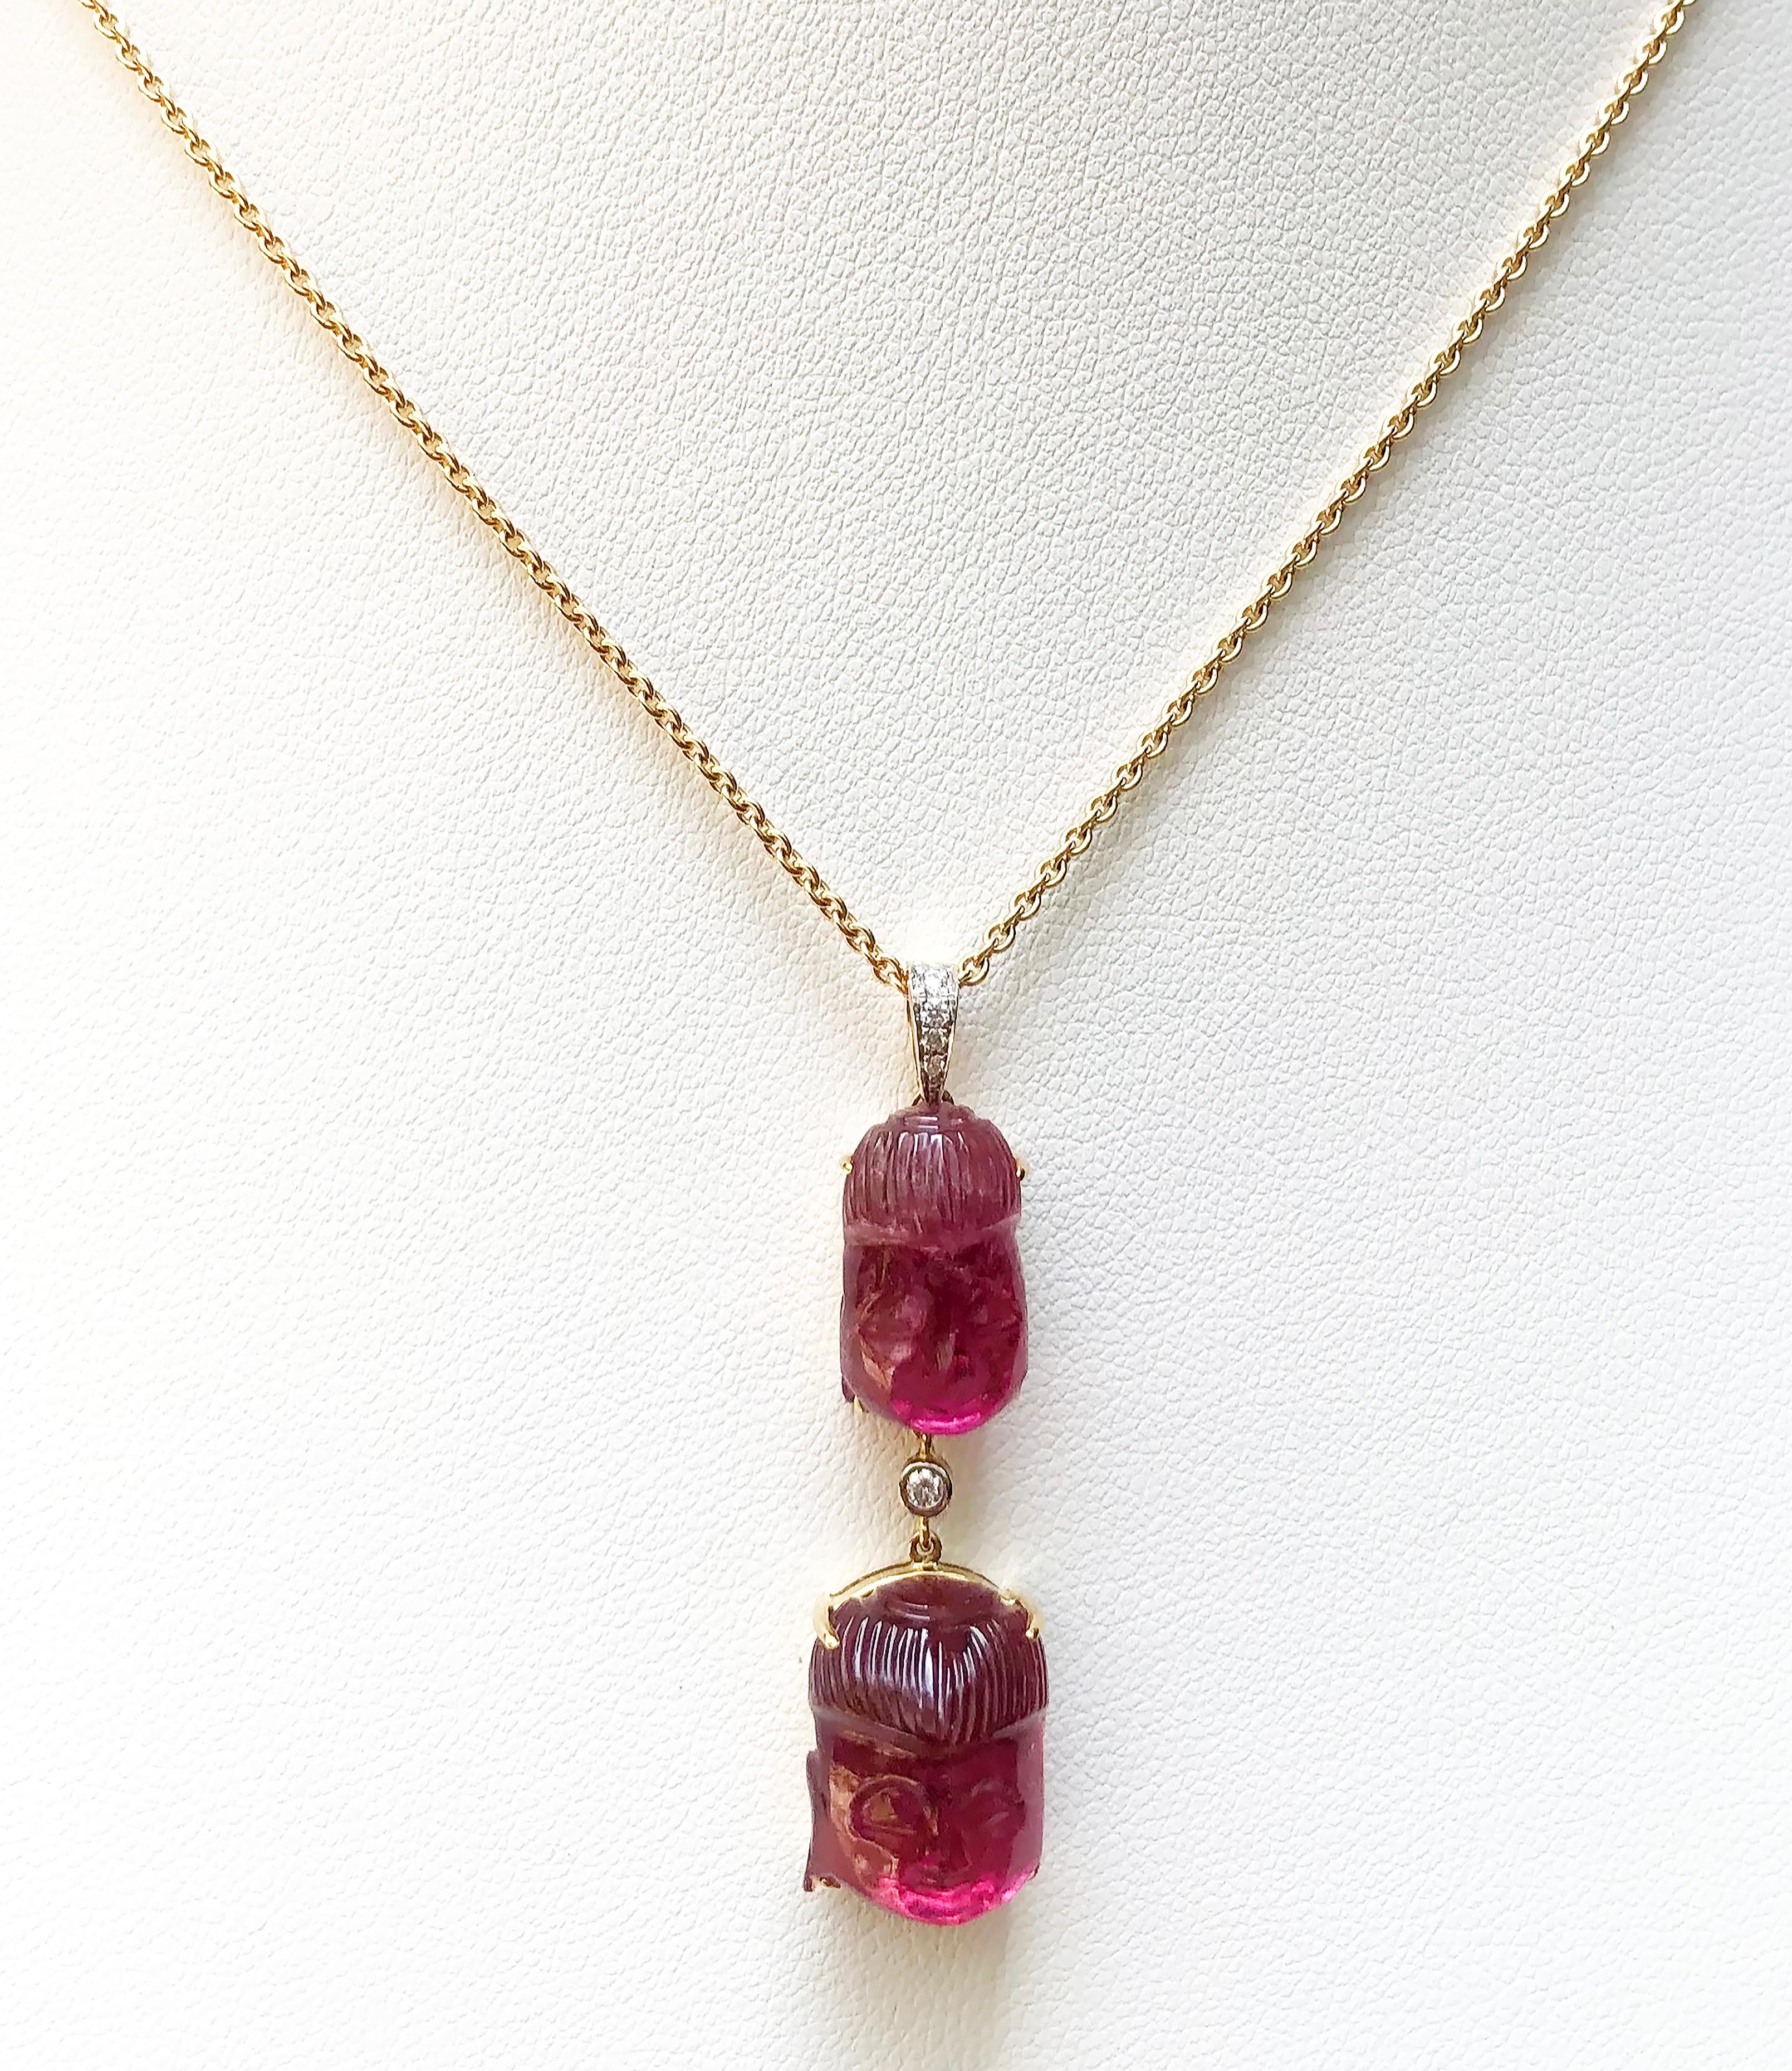 Tourmaline 18.39 carats with Diamond 0.05 carat Pendant set in 18 Karat Gold Settings
(chain not included)

Width:  1.0 cm 
Length: 4.1 cm
Total Weight: 6.94 grams

